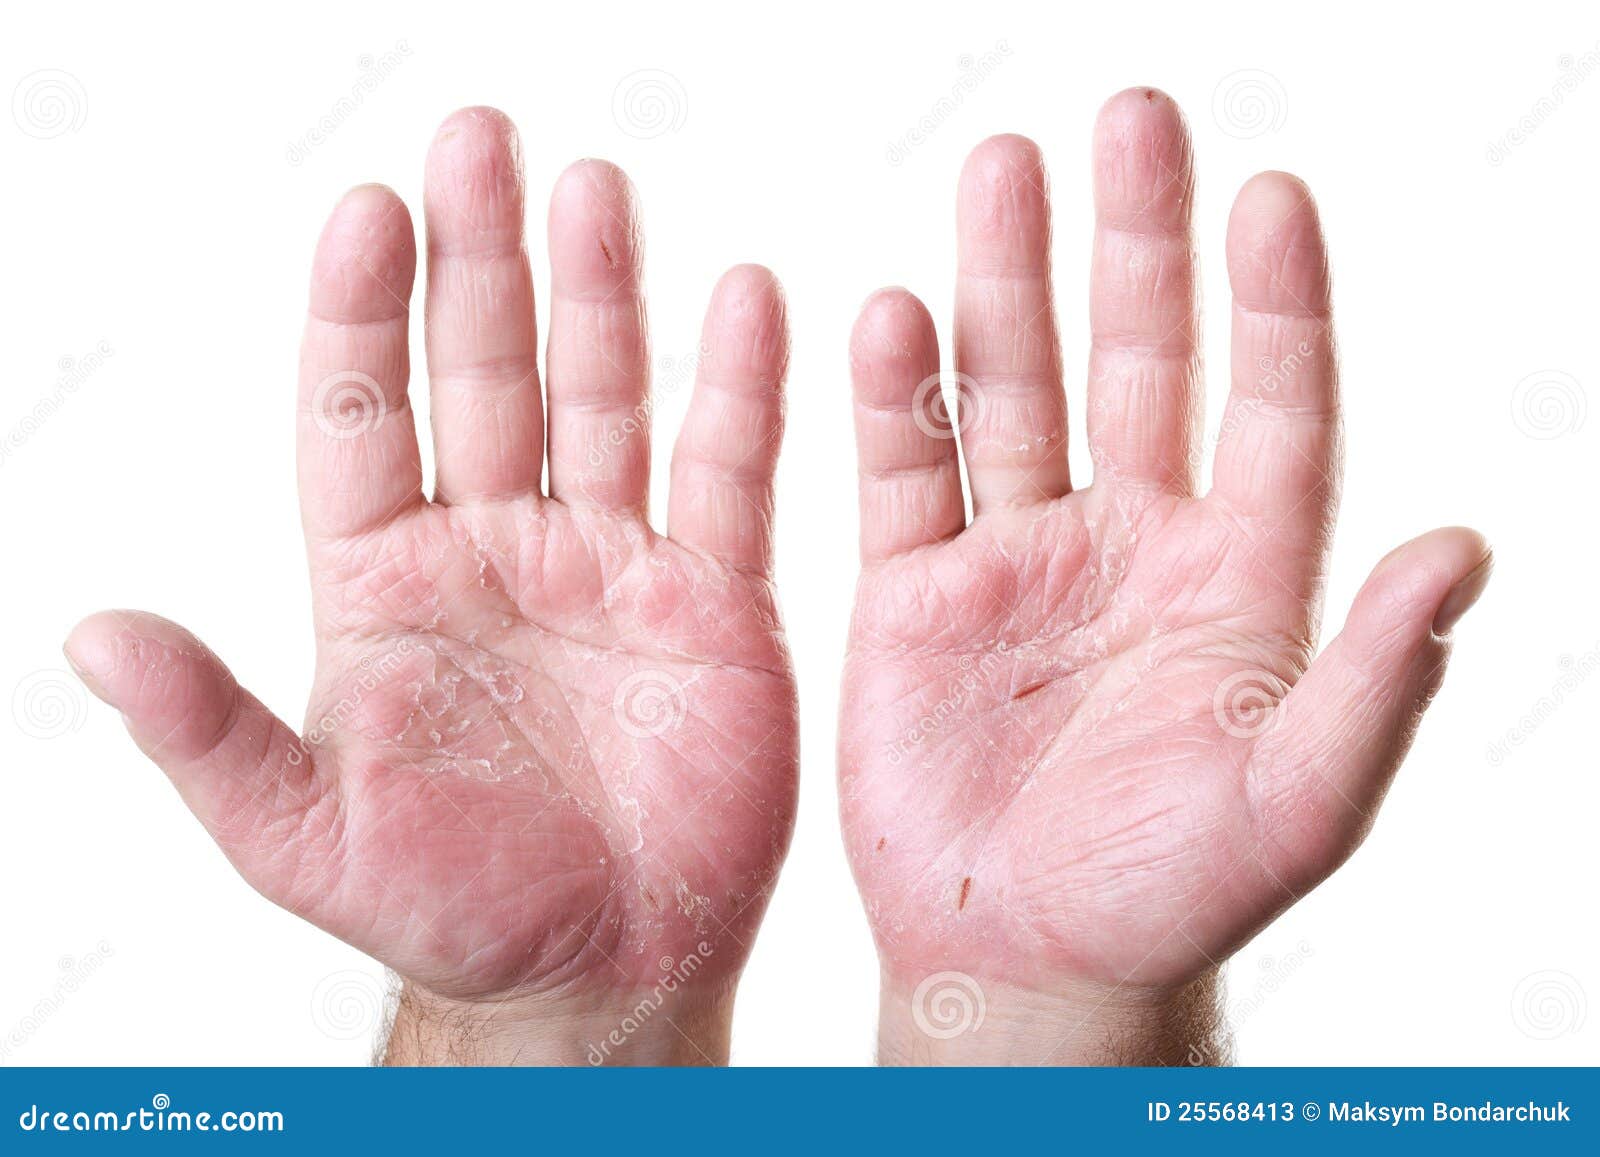 two male palms with eczema  on white